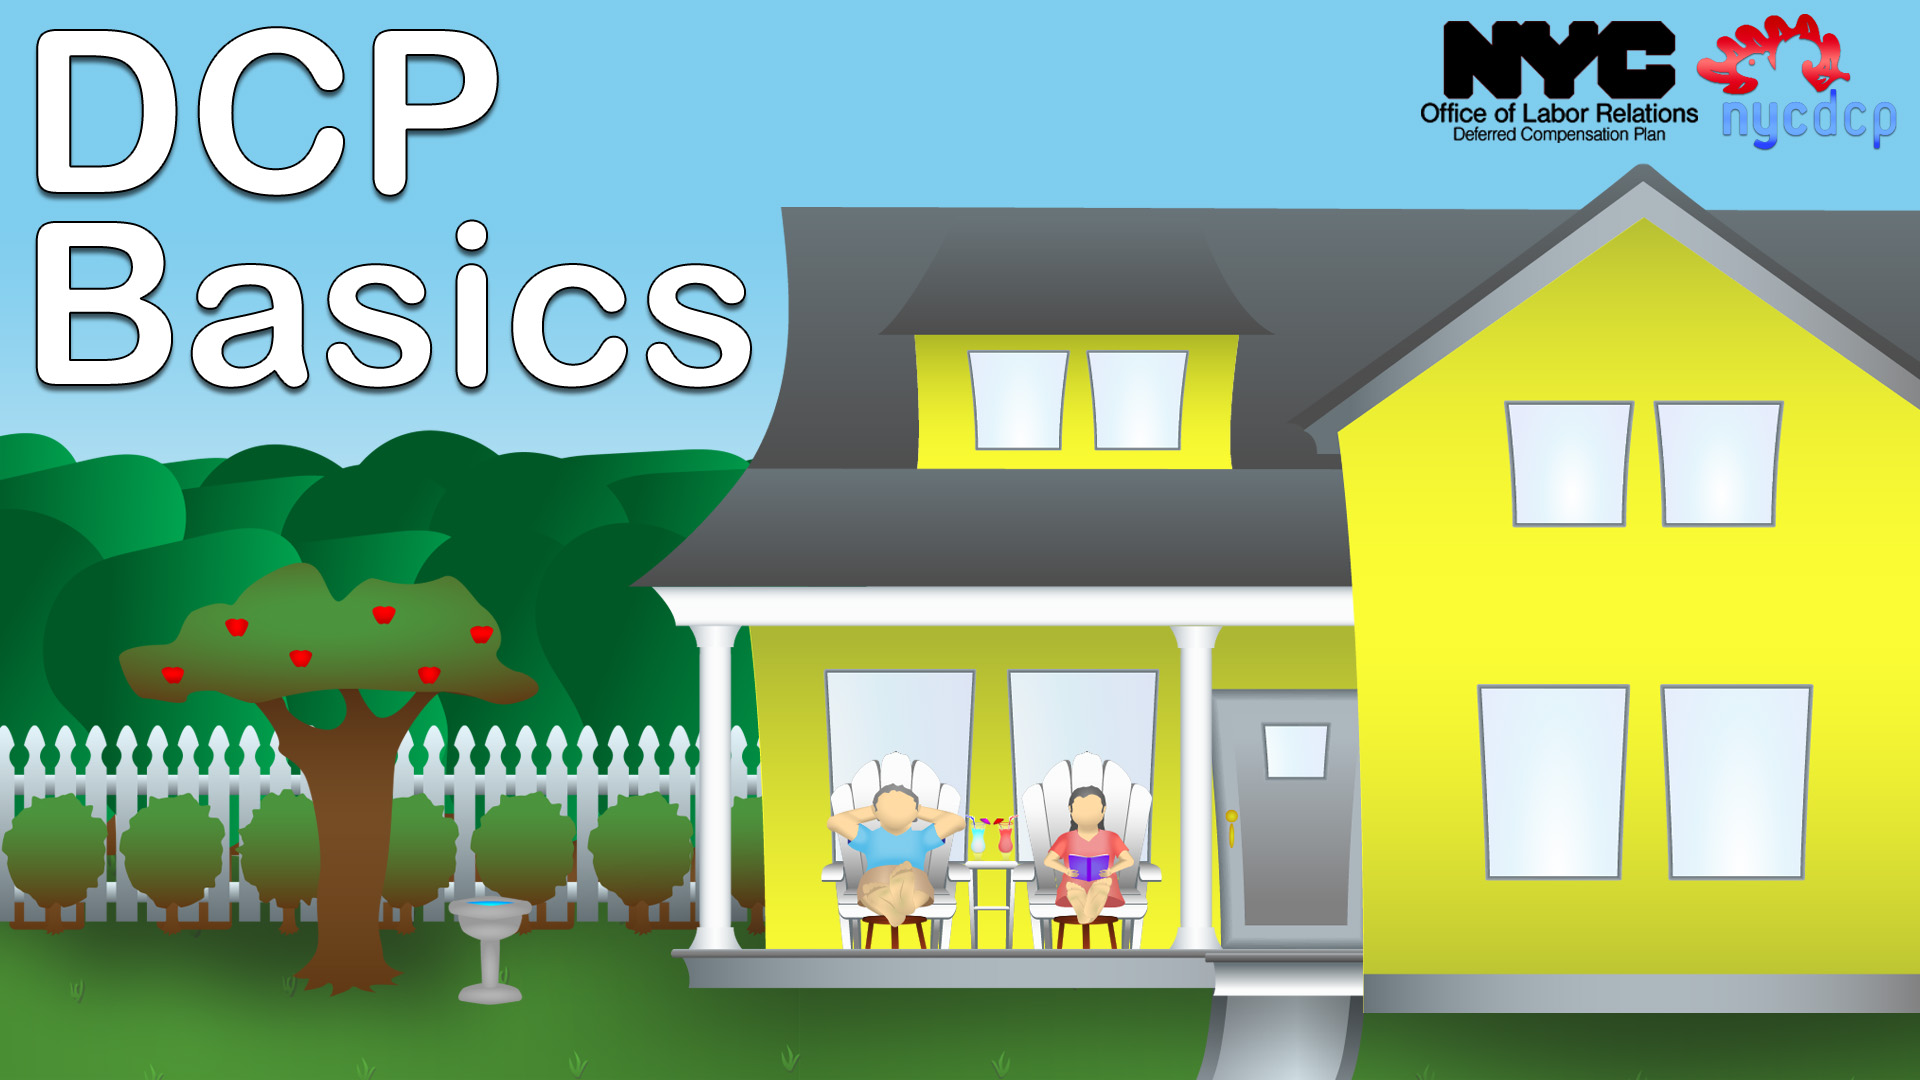 Drawing of a house with two people sitting on front porch with the words "DCP Basics"